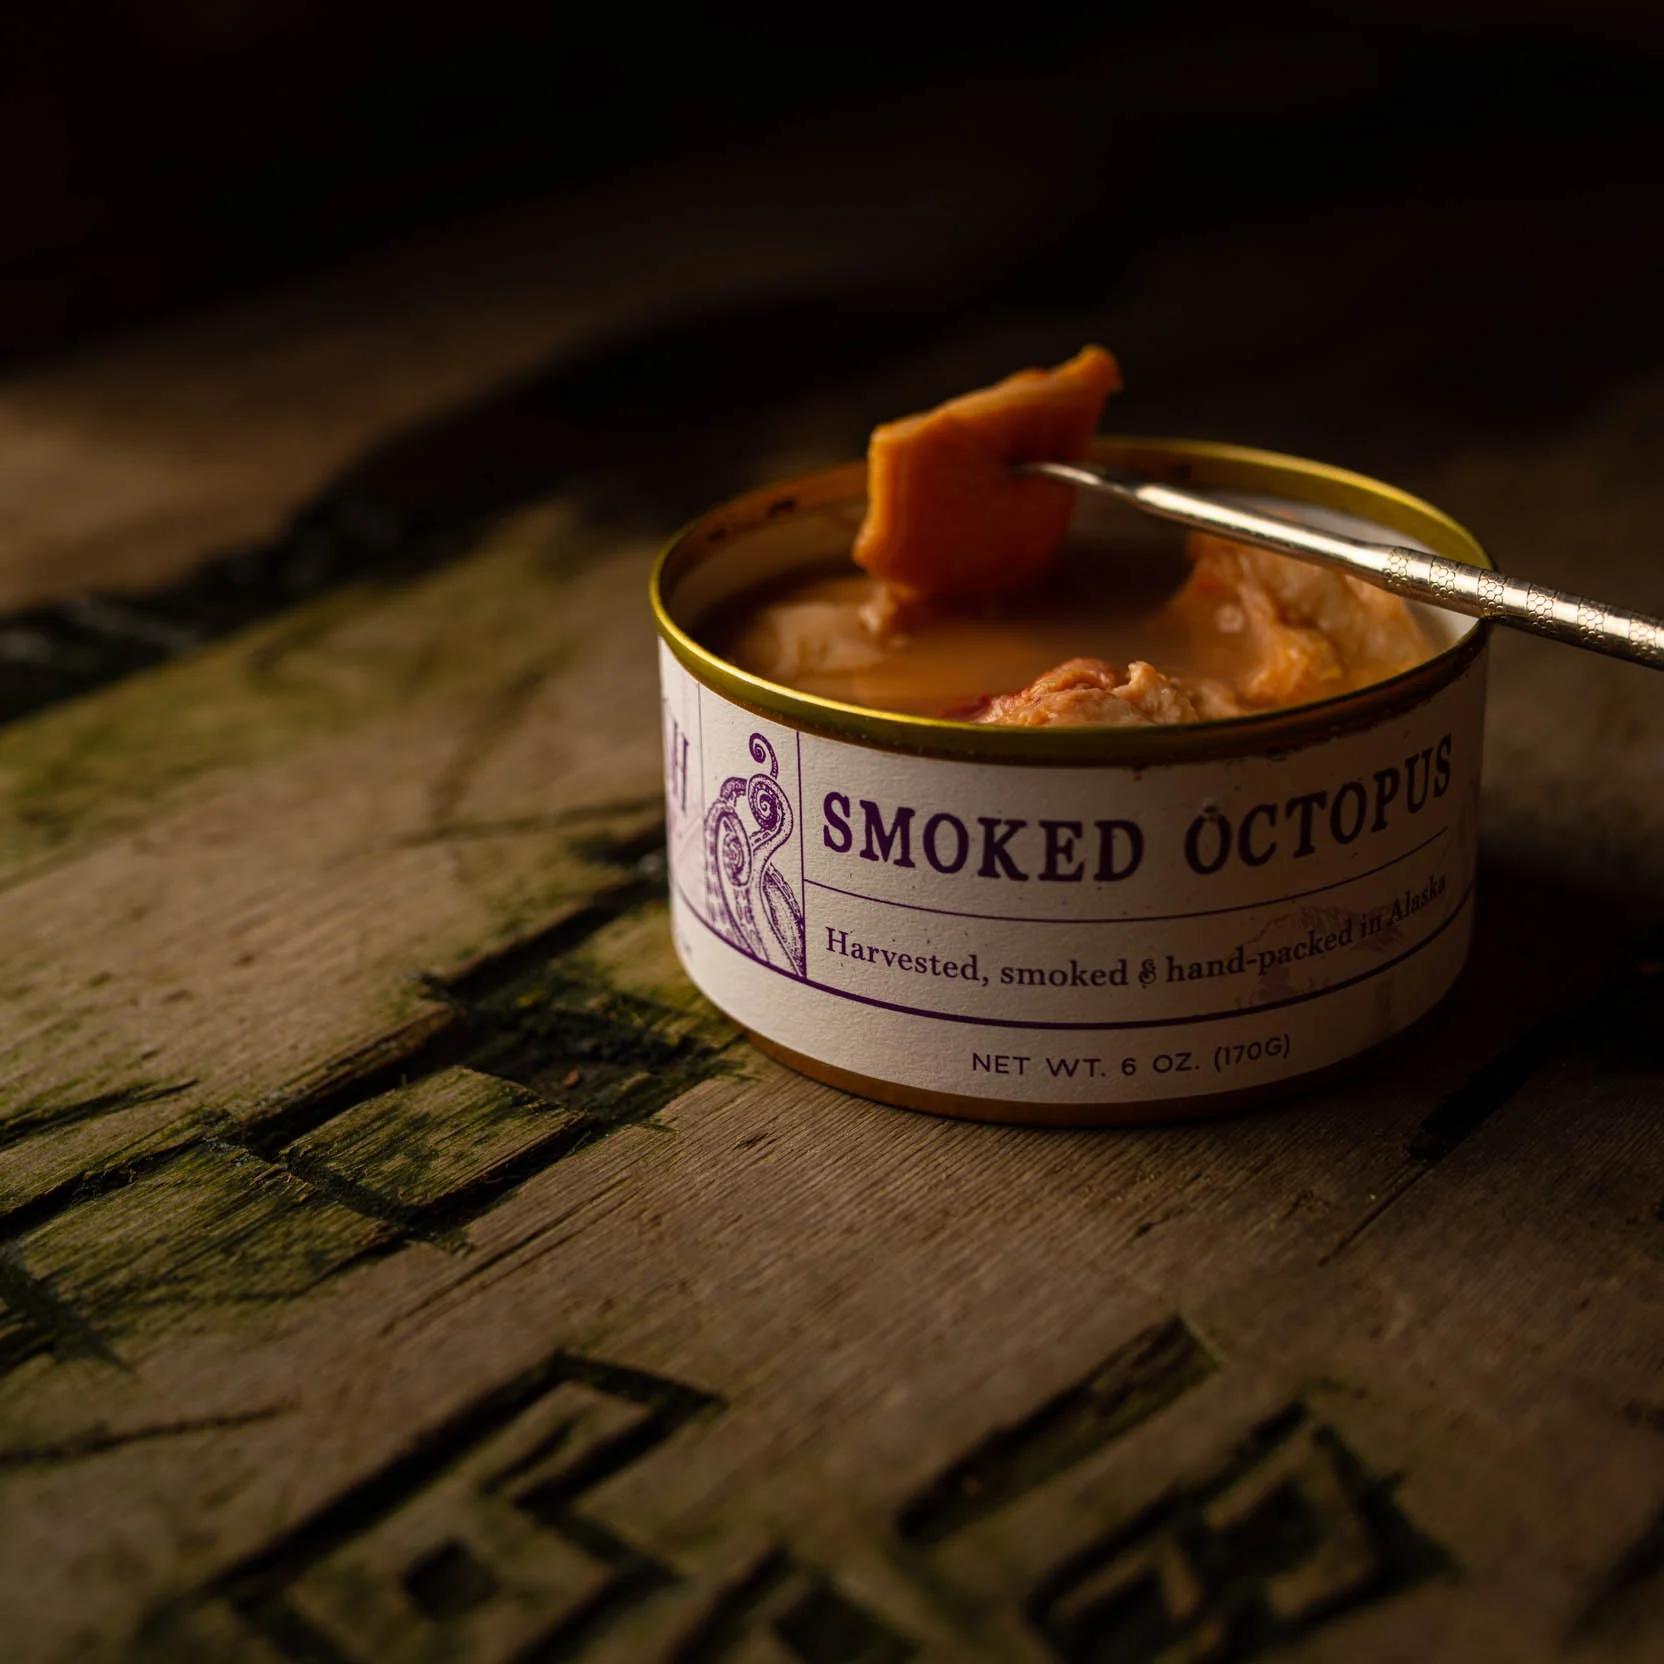 smoked octopus canned - Is canned octopus good